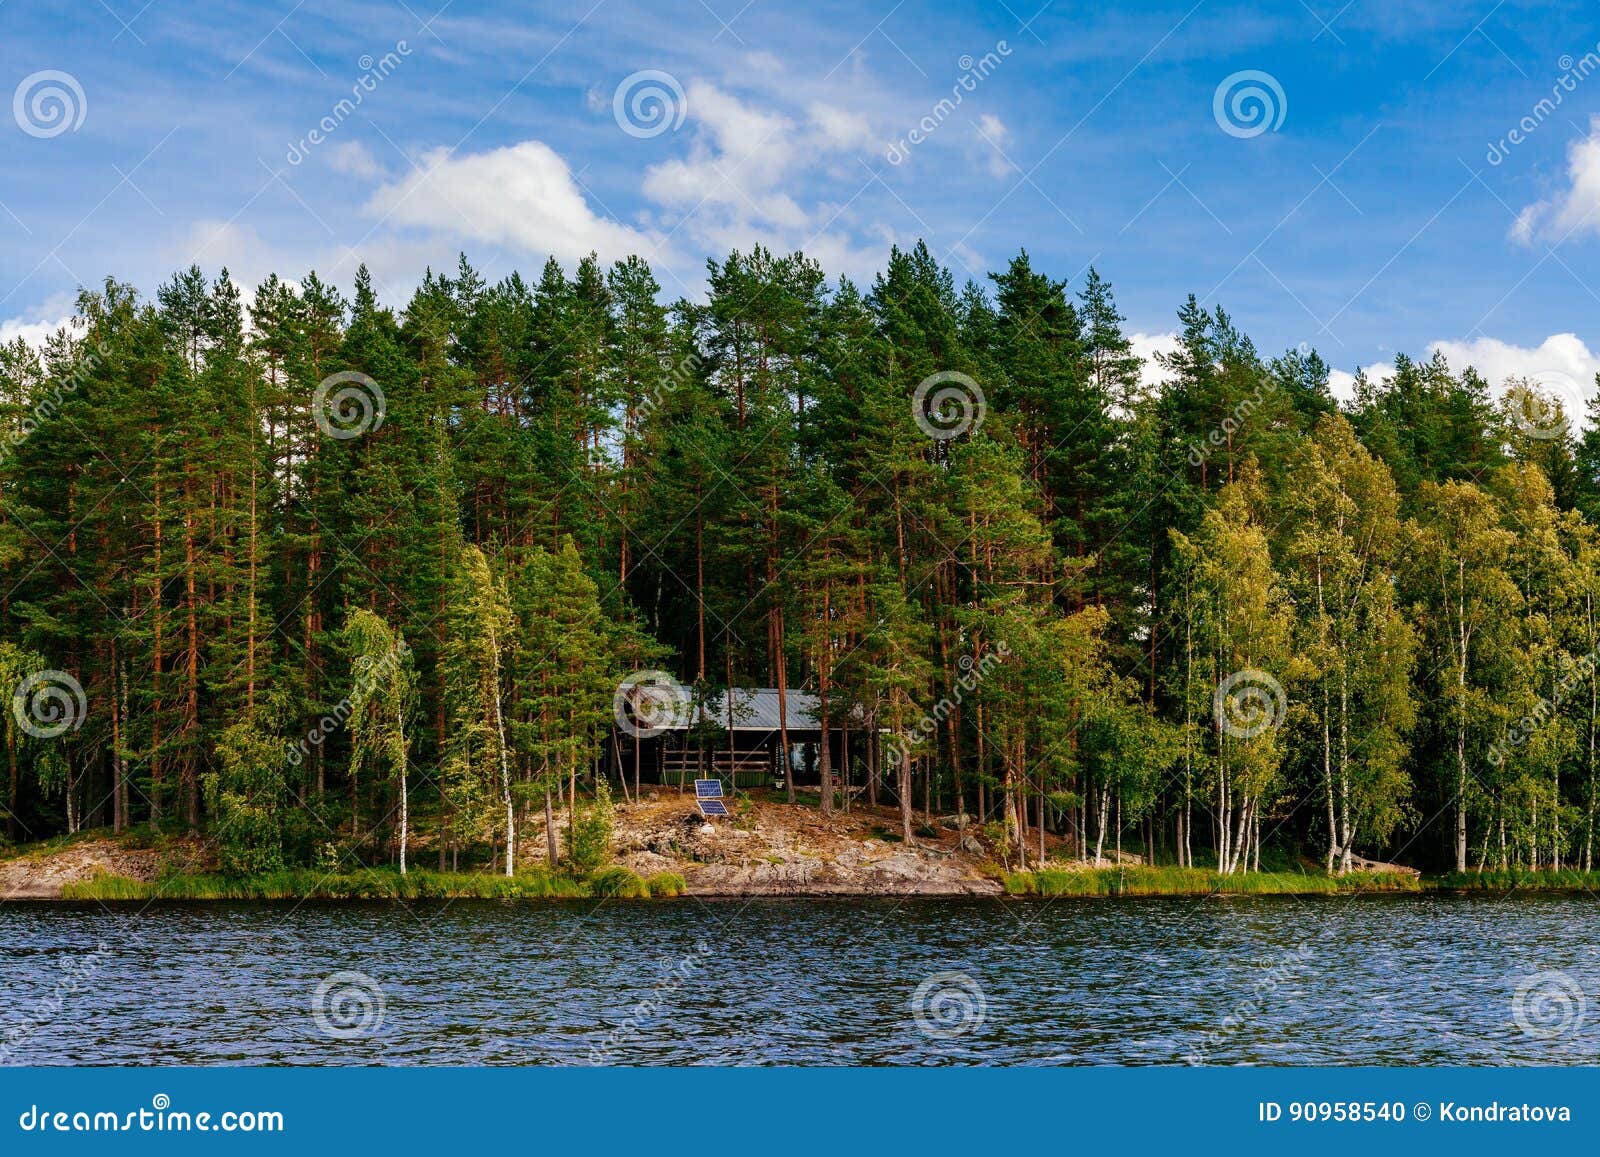 Wooden Log Cabin at the Lake in Summer in Finland Stock Photo - Image ...